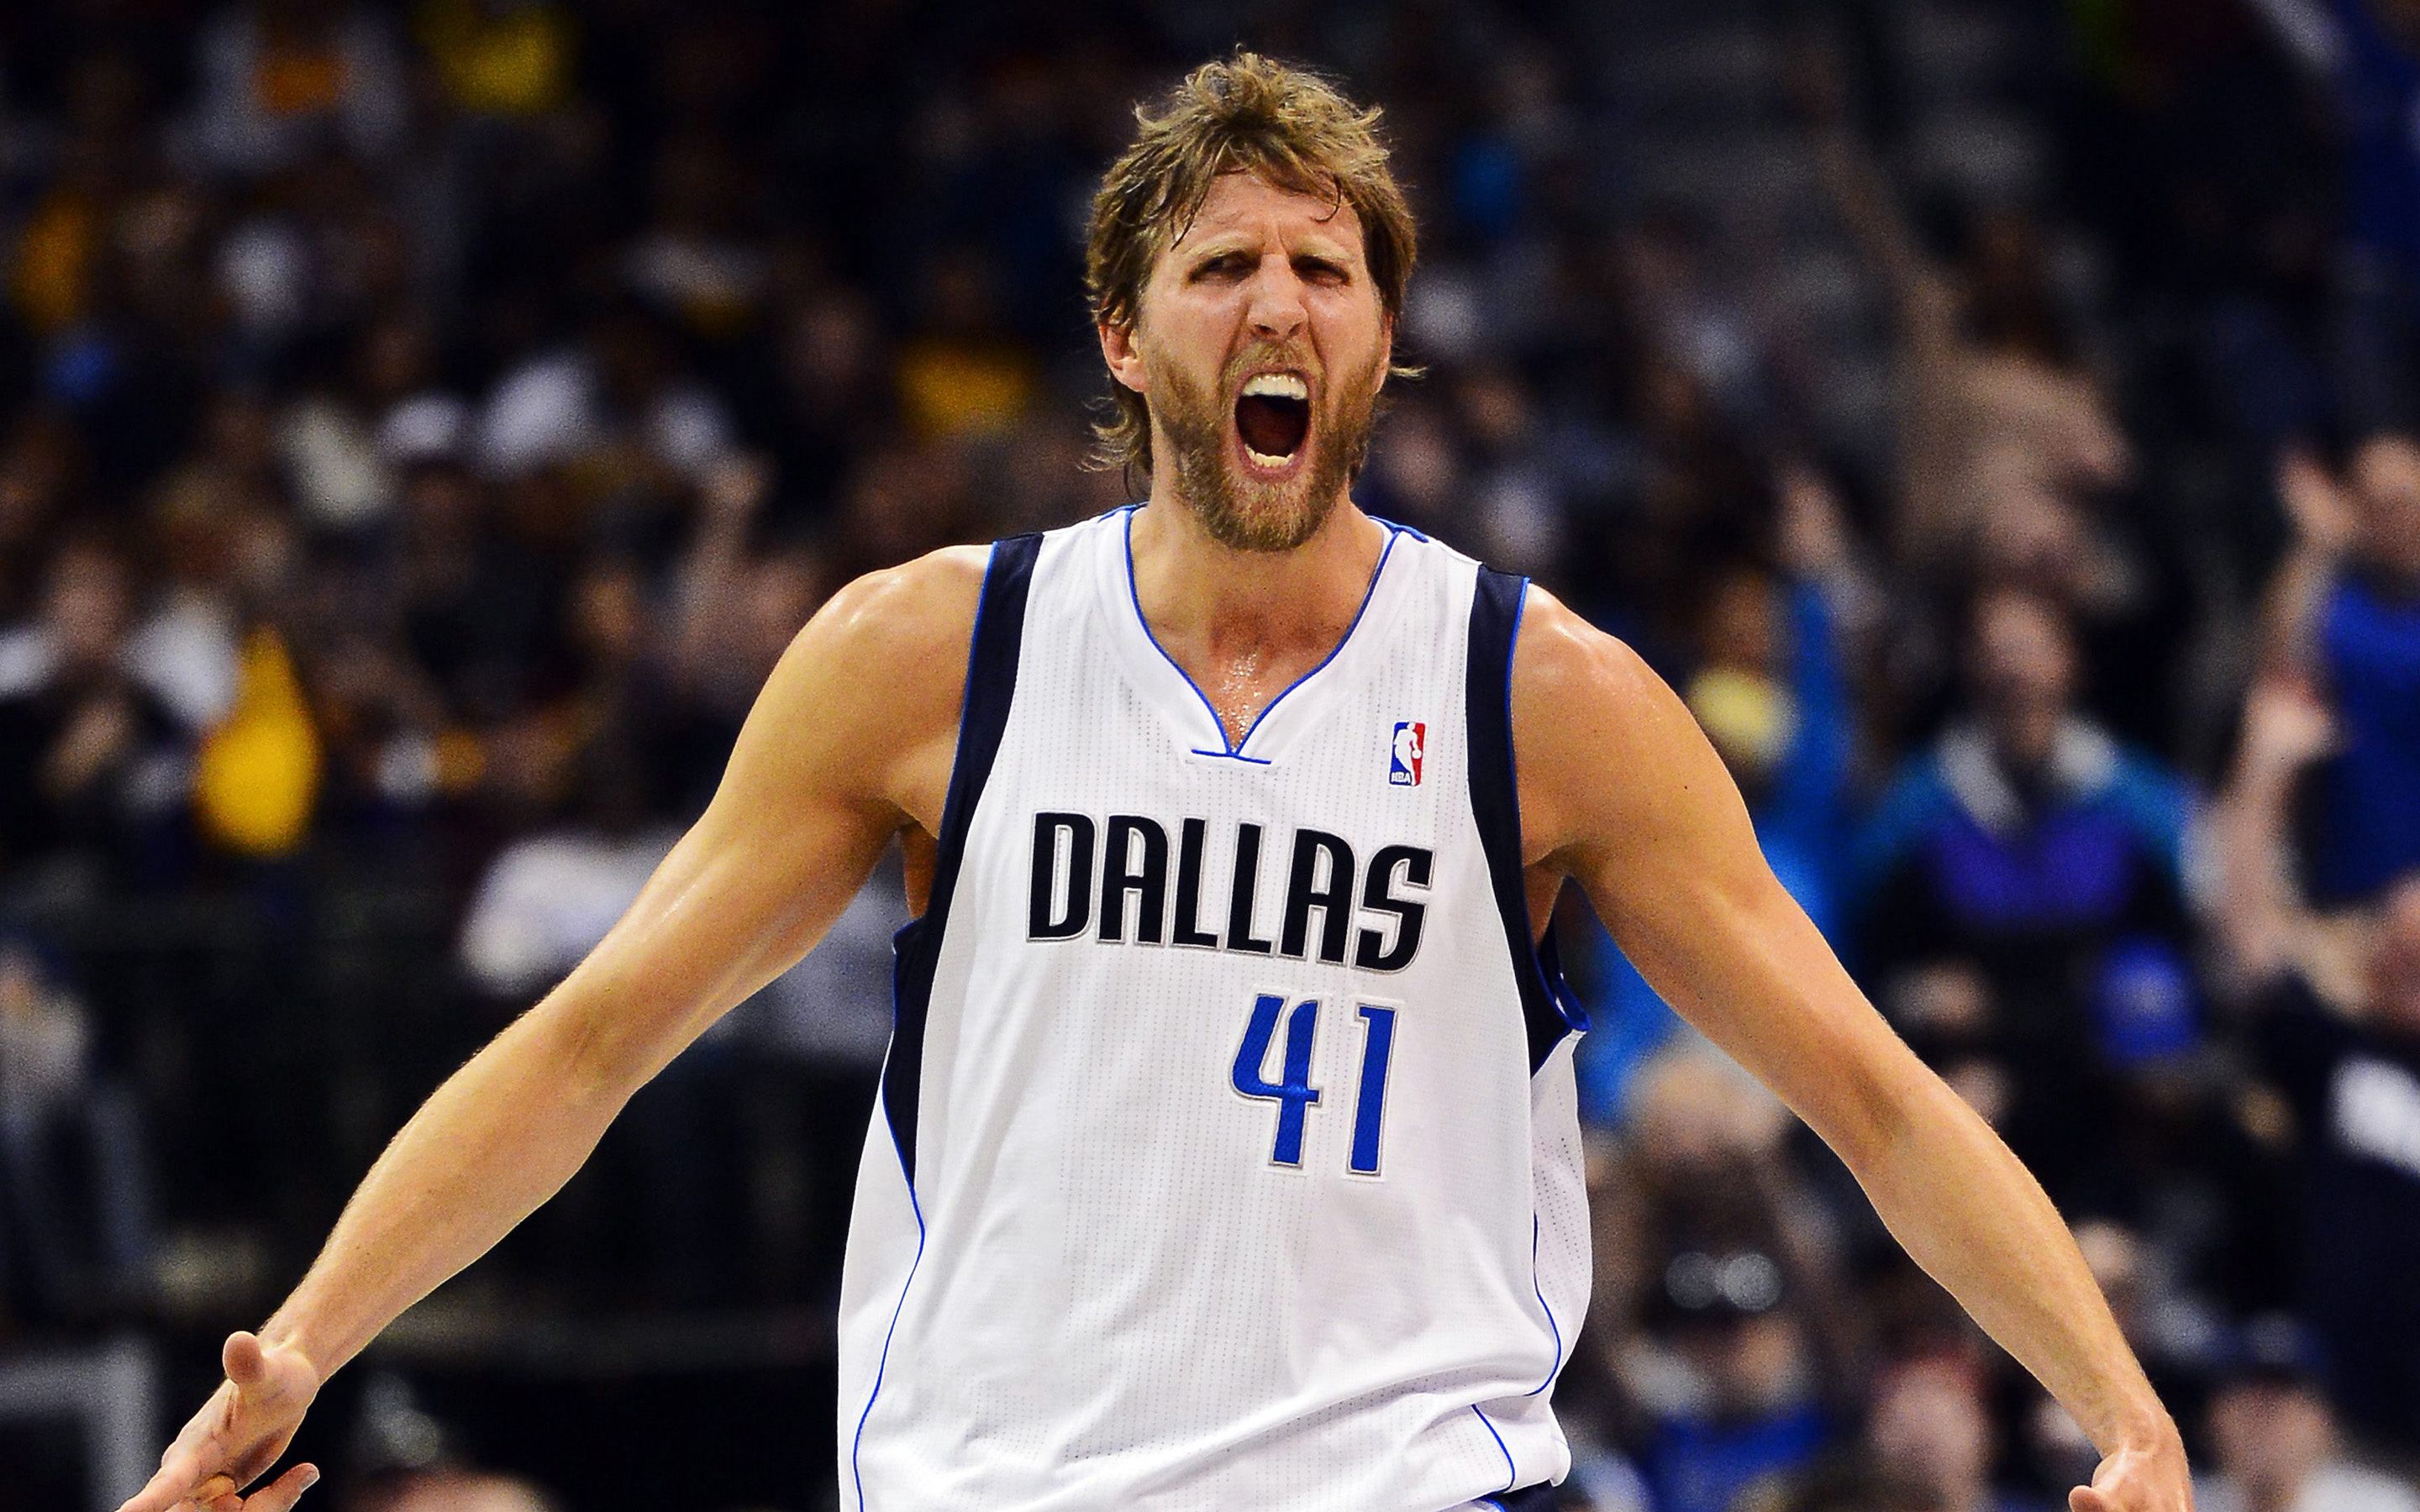 epa03599029 Dallas Mavericks' German player Dirk Nowitzki reacts after scoring a three point basket against the Los Angeles Lakers in the second half of their NBA basketball game at the American Airlines Center in Dallas, Texas, USA, 24 February 2013. EPA/LARRY W. SMITH CORBIS OUT +++(c) dpa - Bildfunk+++